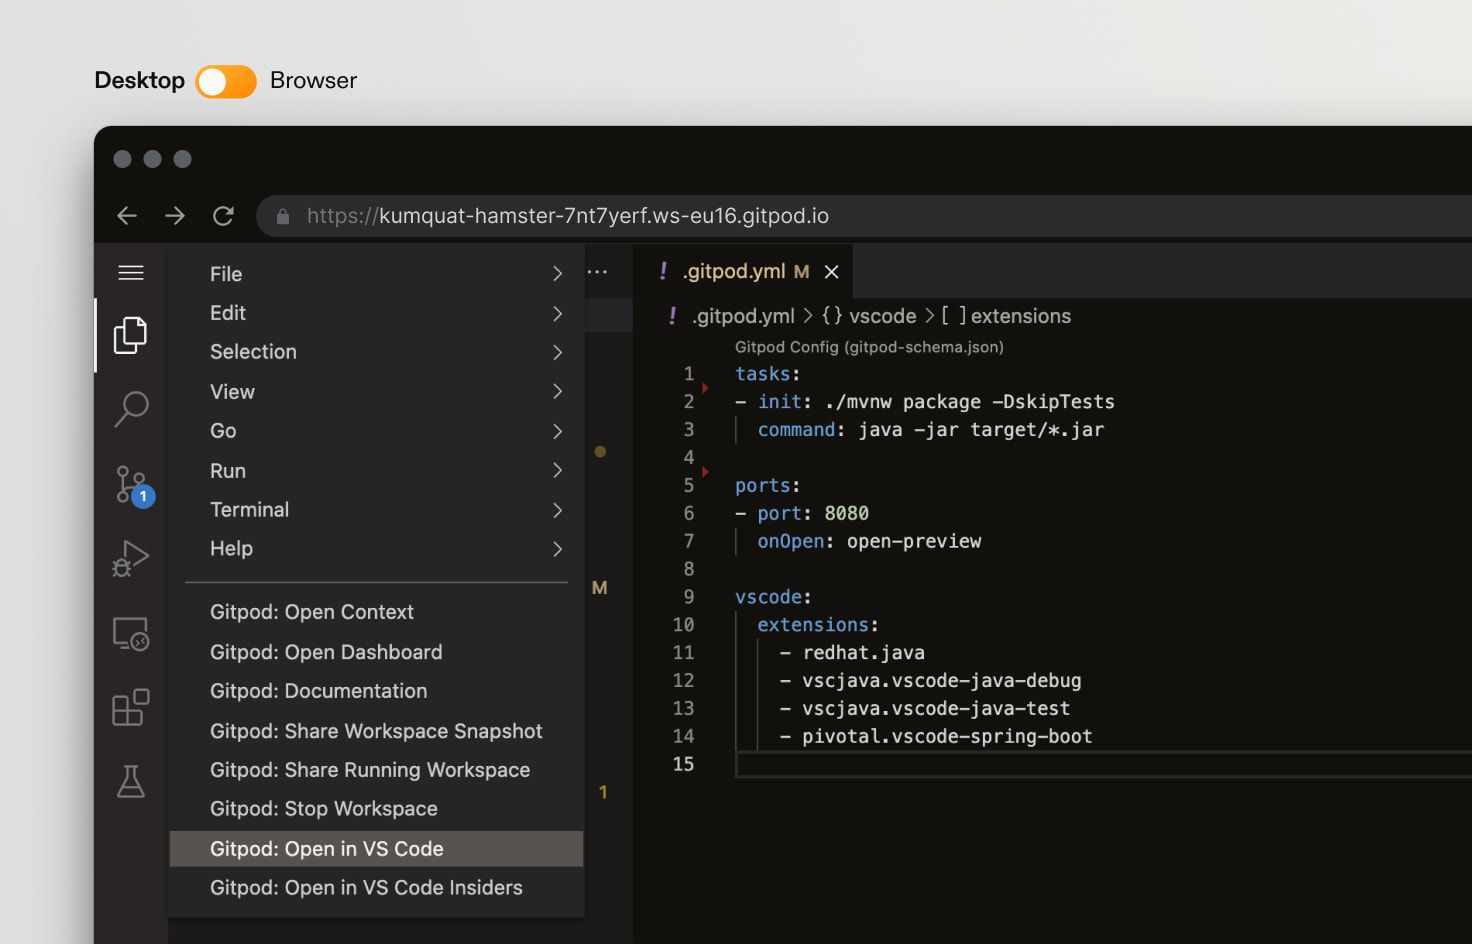 VS Code open in a Gitpod workspace with the option to open in local VS Code displayed